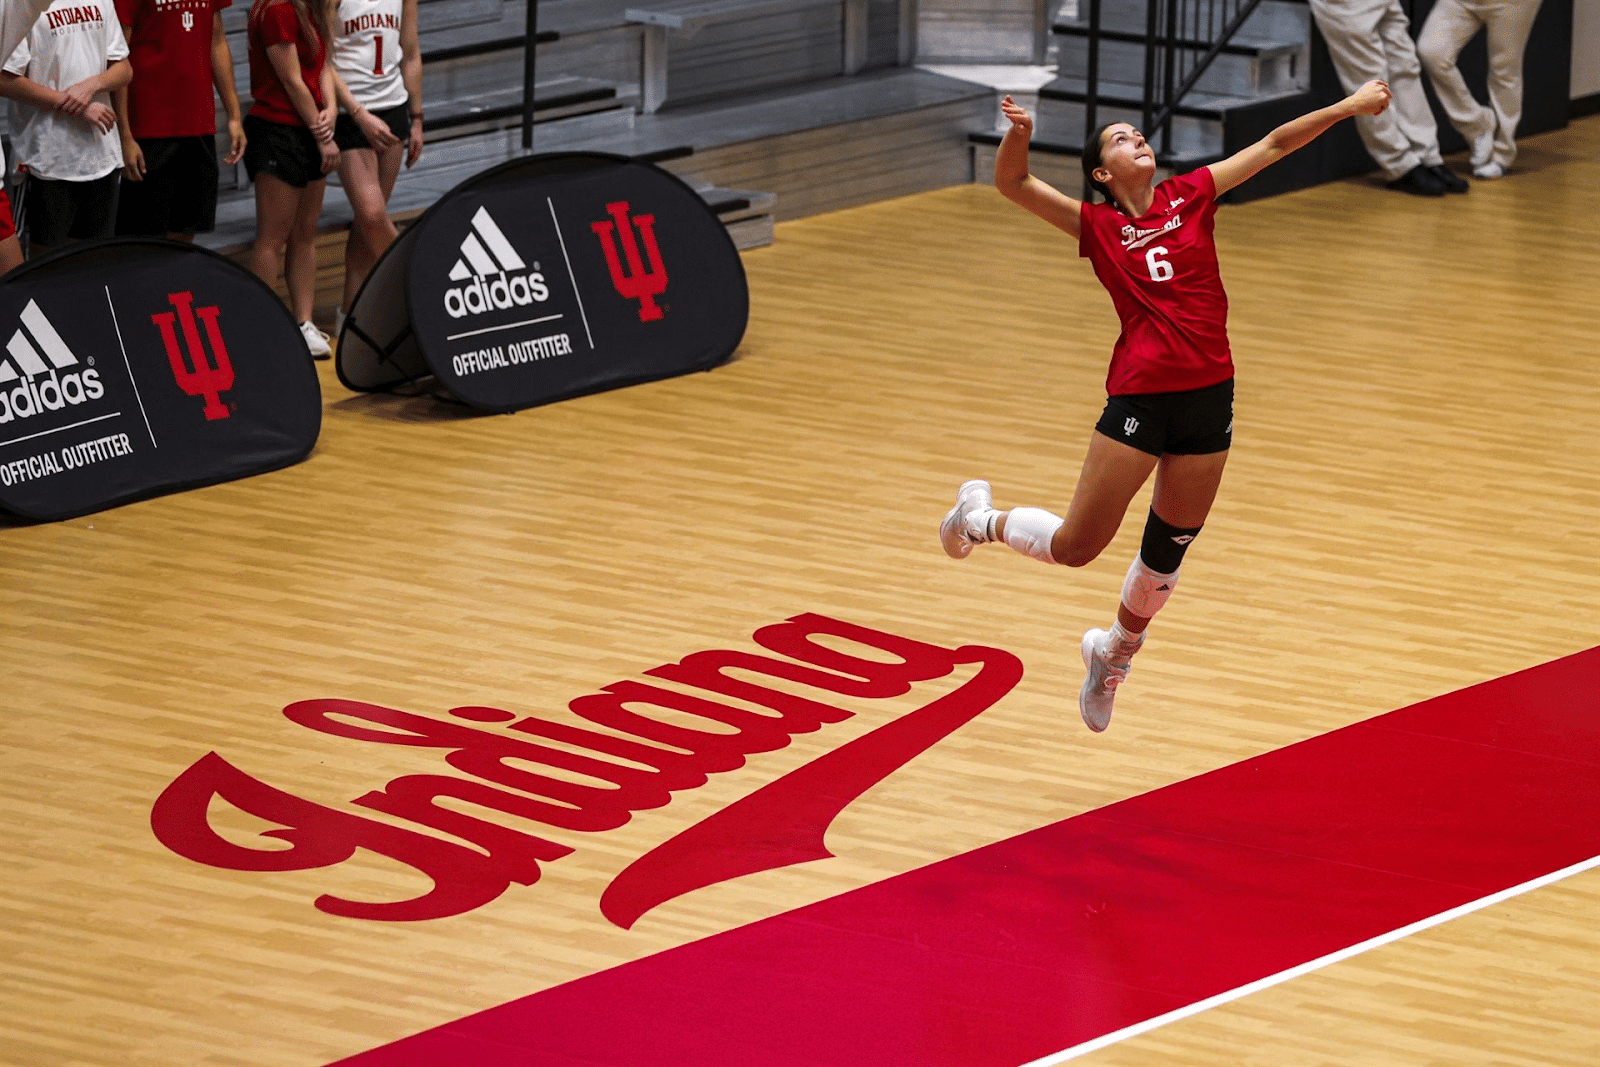 Kenzie Daffinee Indiana Volleyball & Ultra Ankle Ultra Athlete